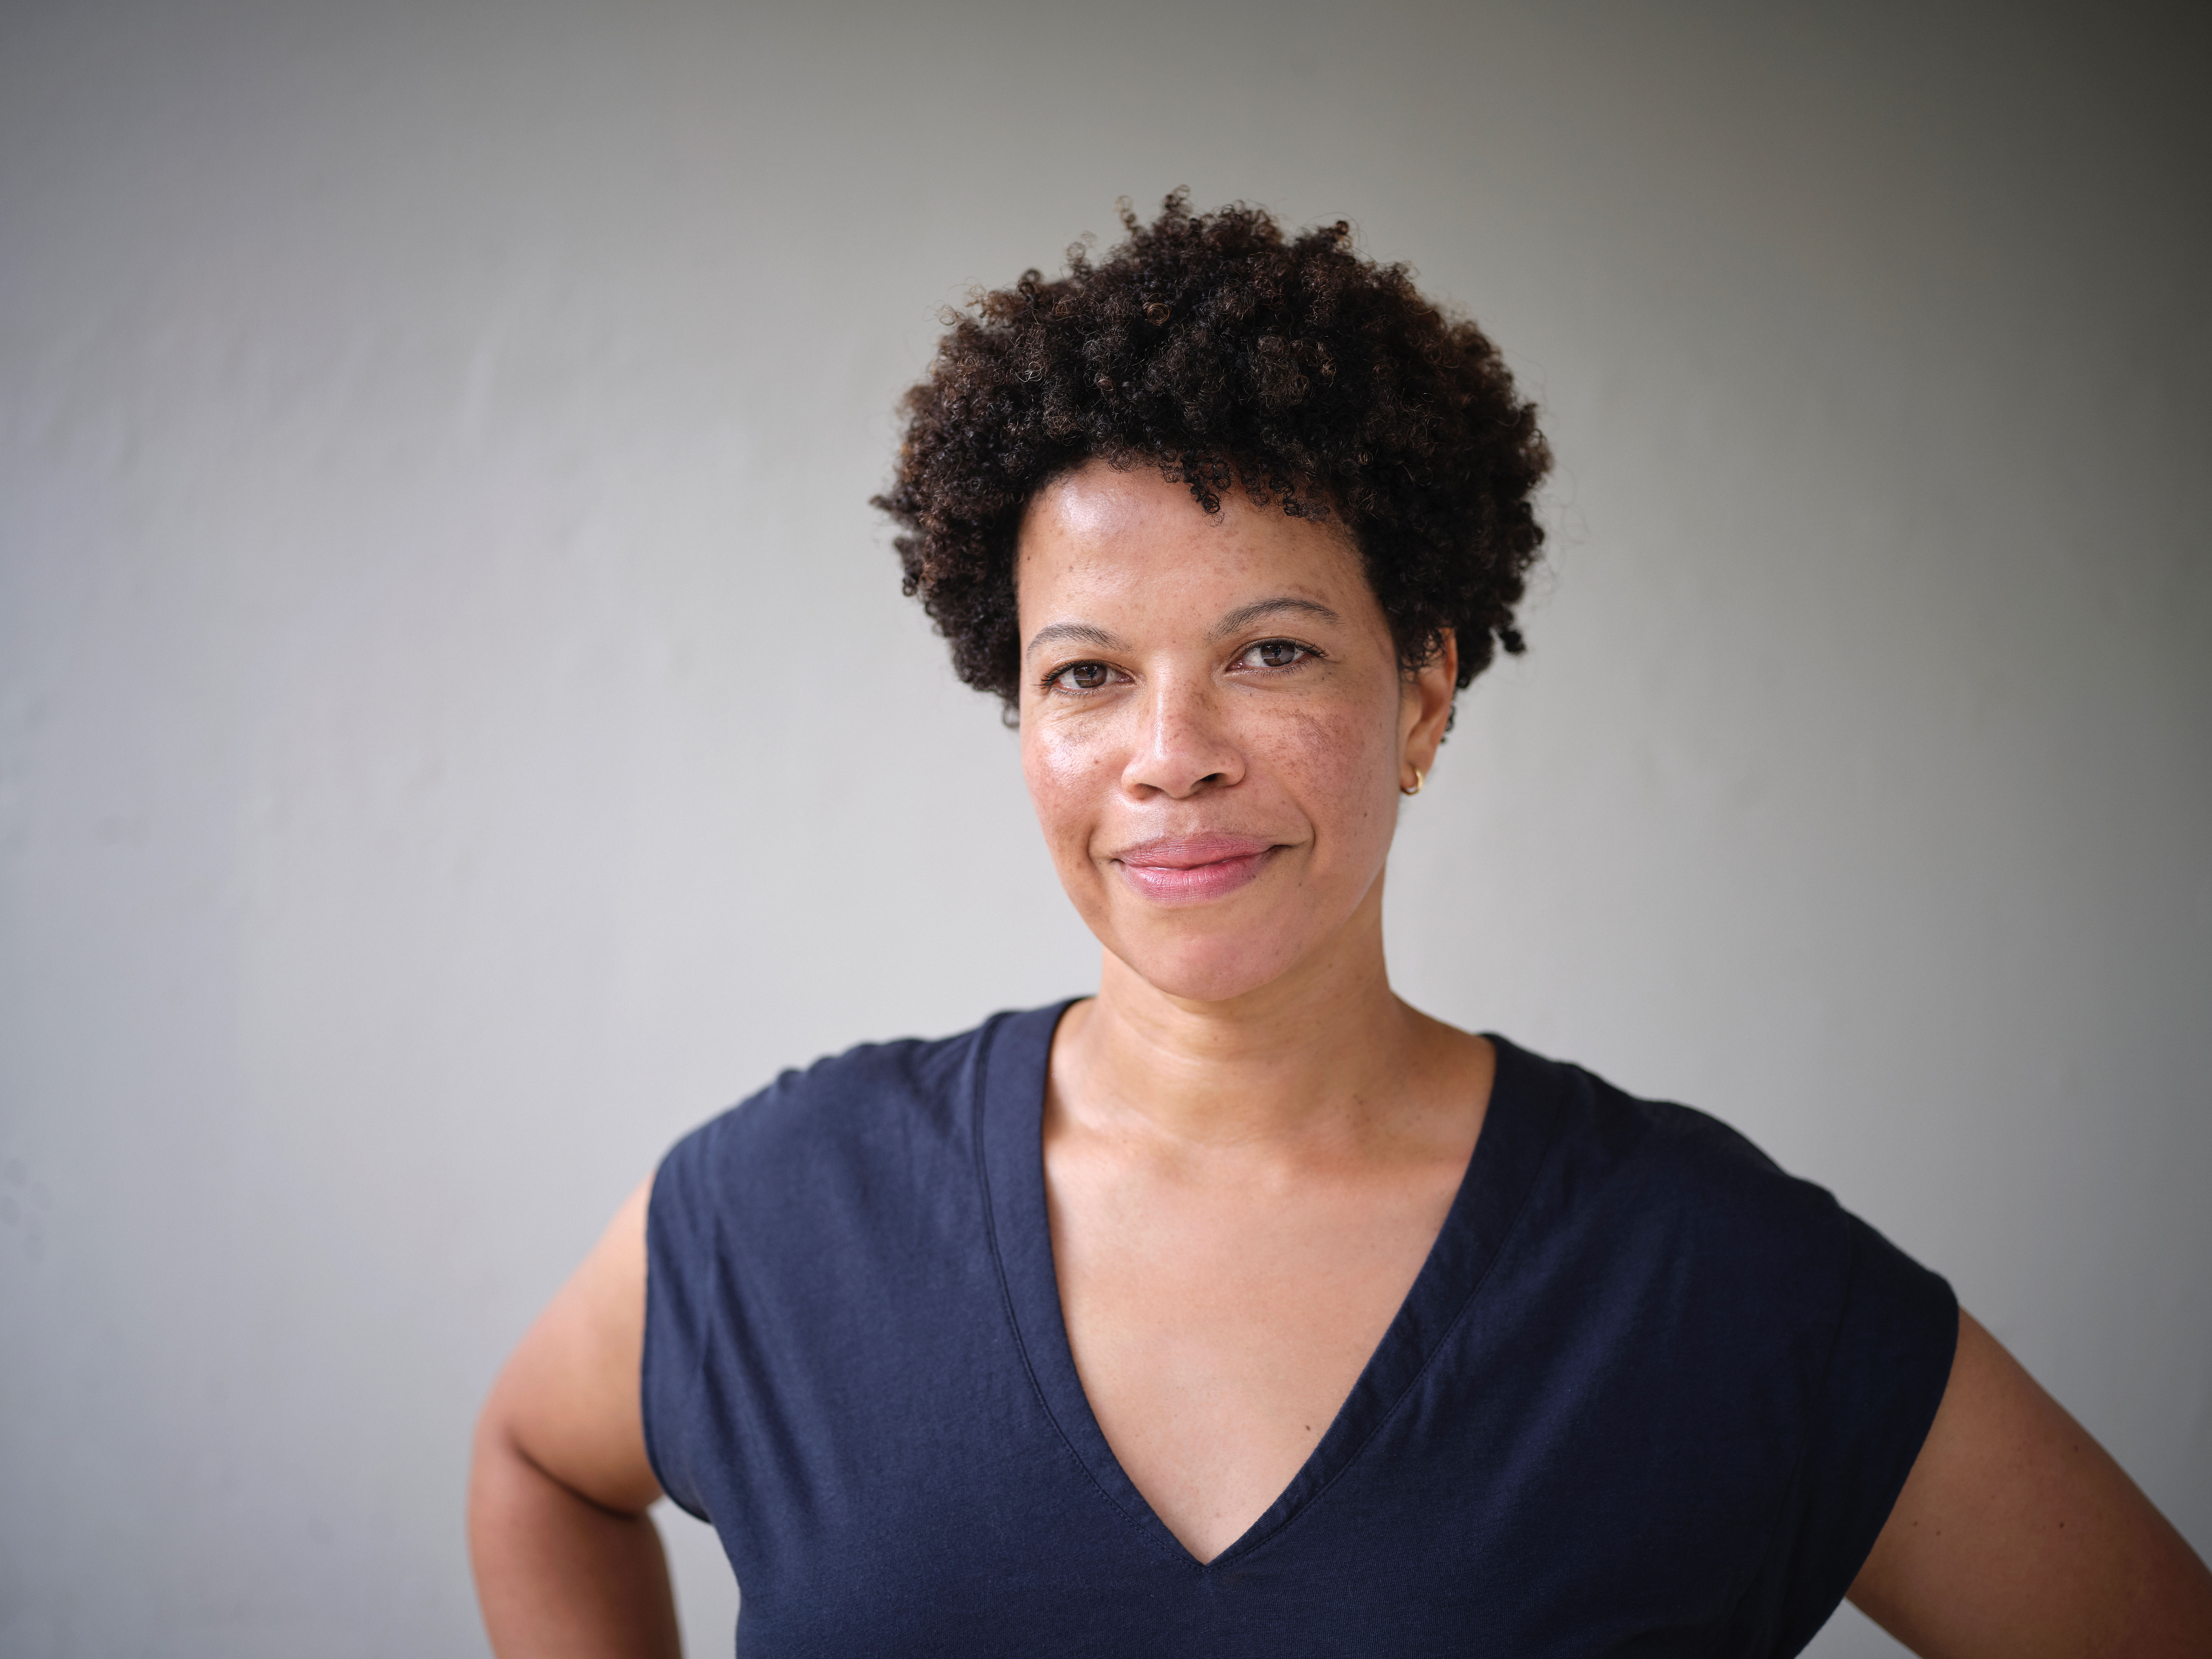 A photo portrait of a black woman. She has gold earrings. Her dark hair is short, above the ear, with tight curls. She is wearing a dark blue v-neck t-shirt with her hands on her hips. She is looking into the camera, smiling slightly.